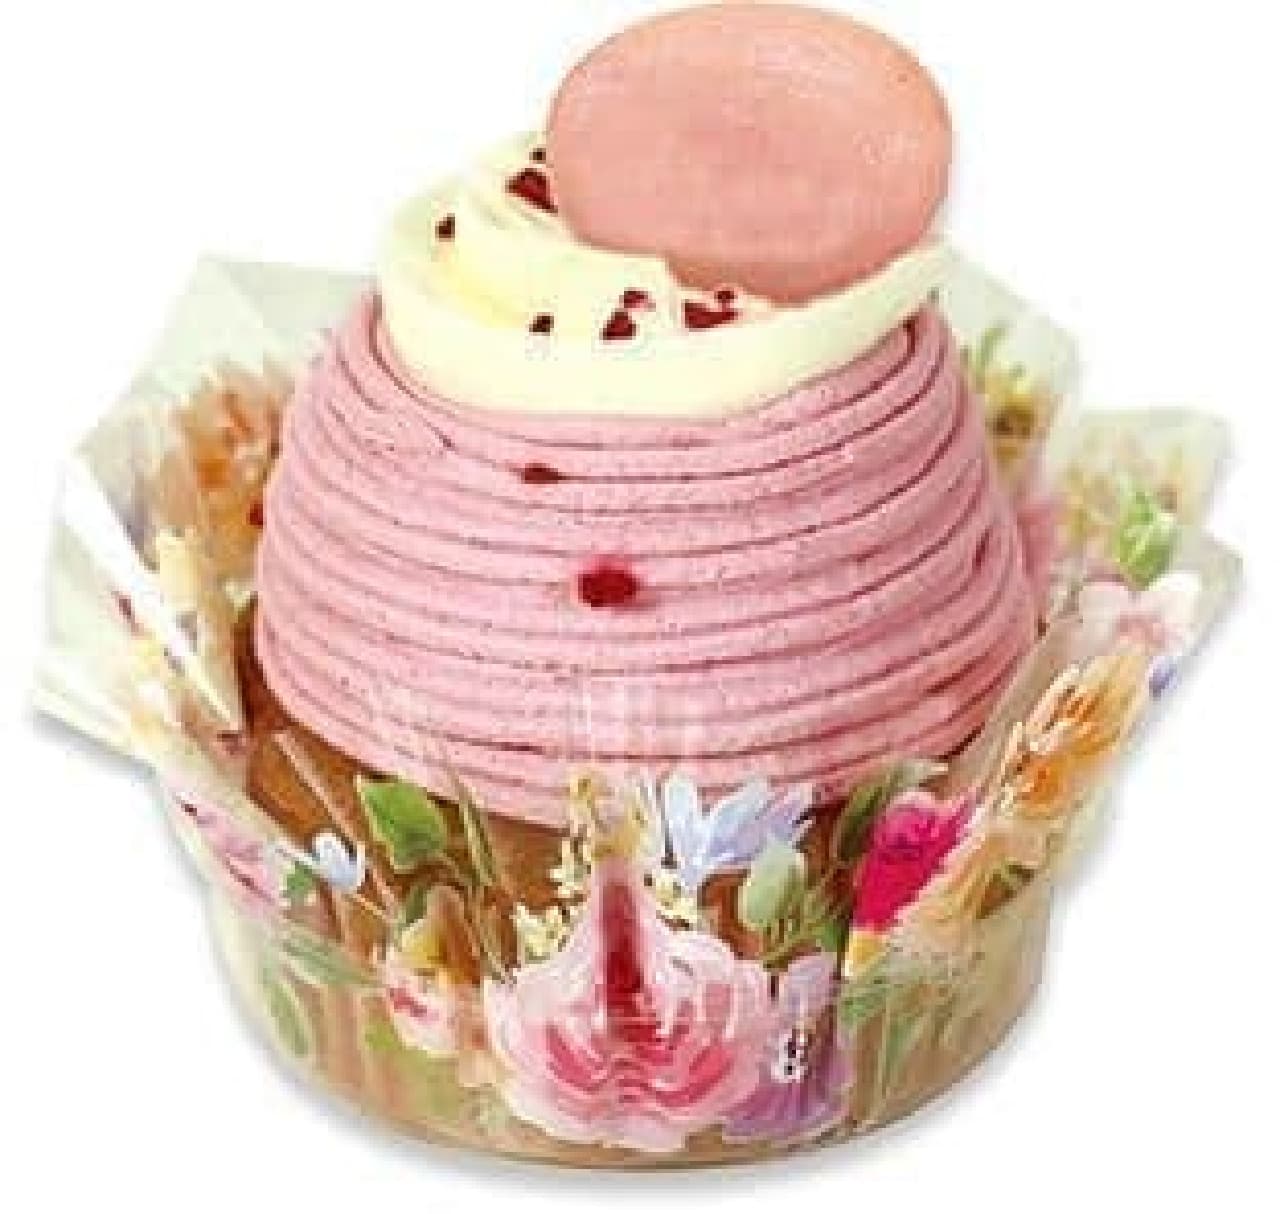 Fujiya pastry shop "Mont Blanc of sky berries from Tochigi prefecture"